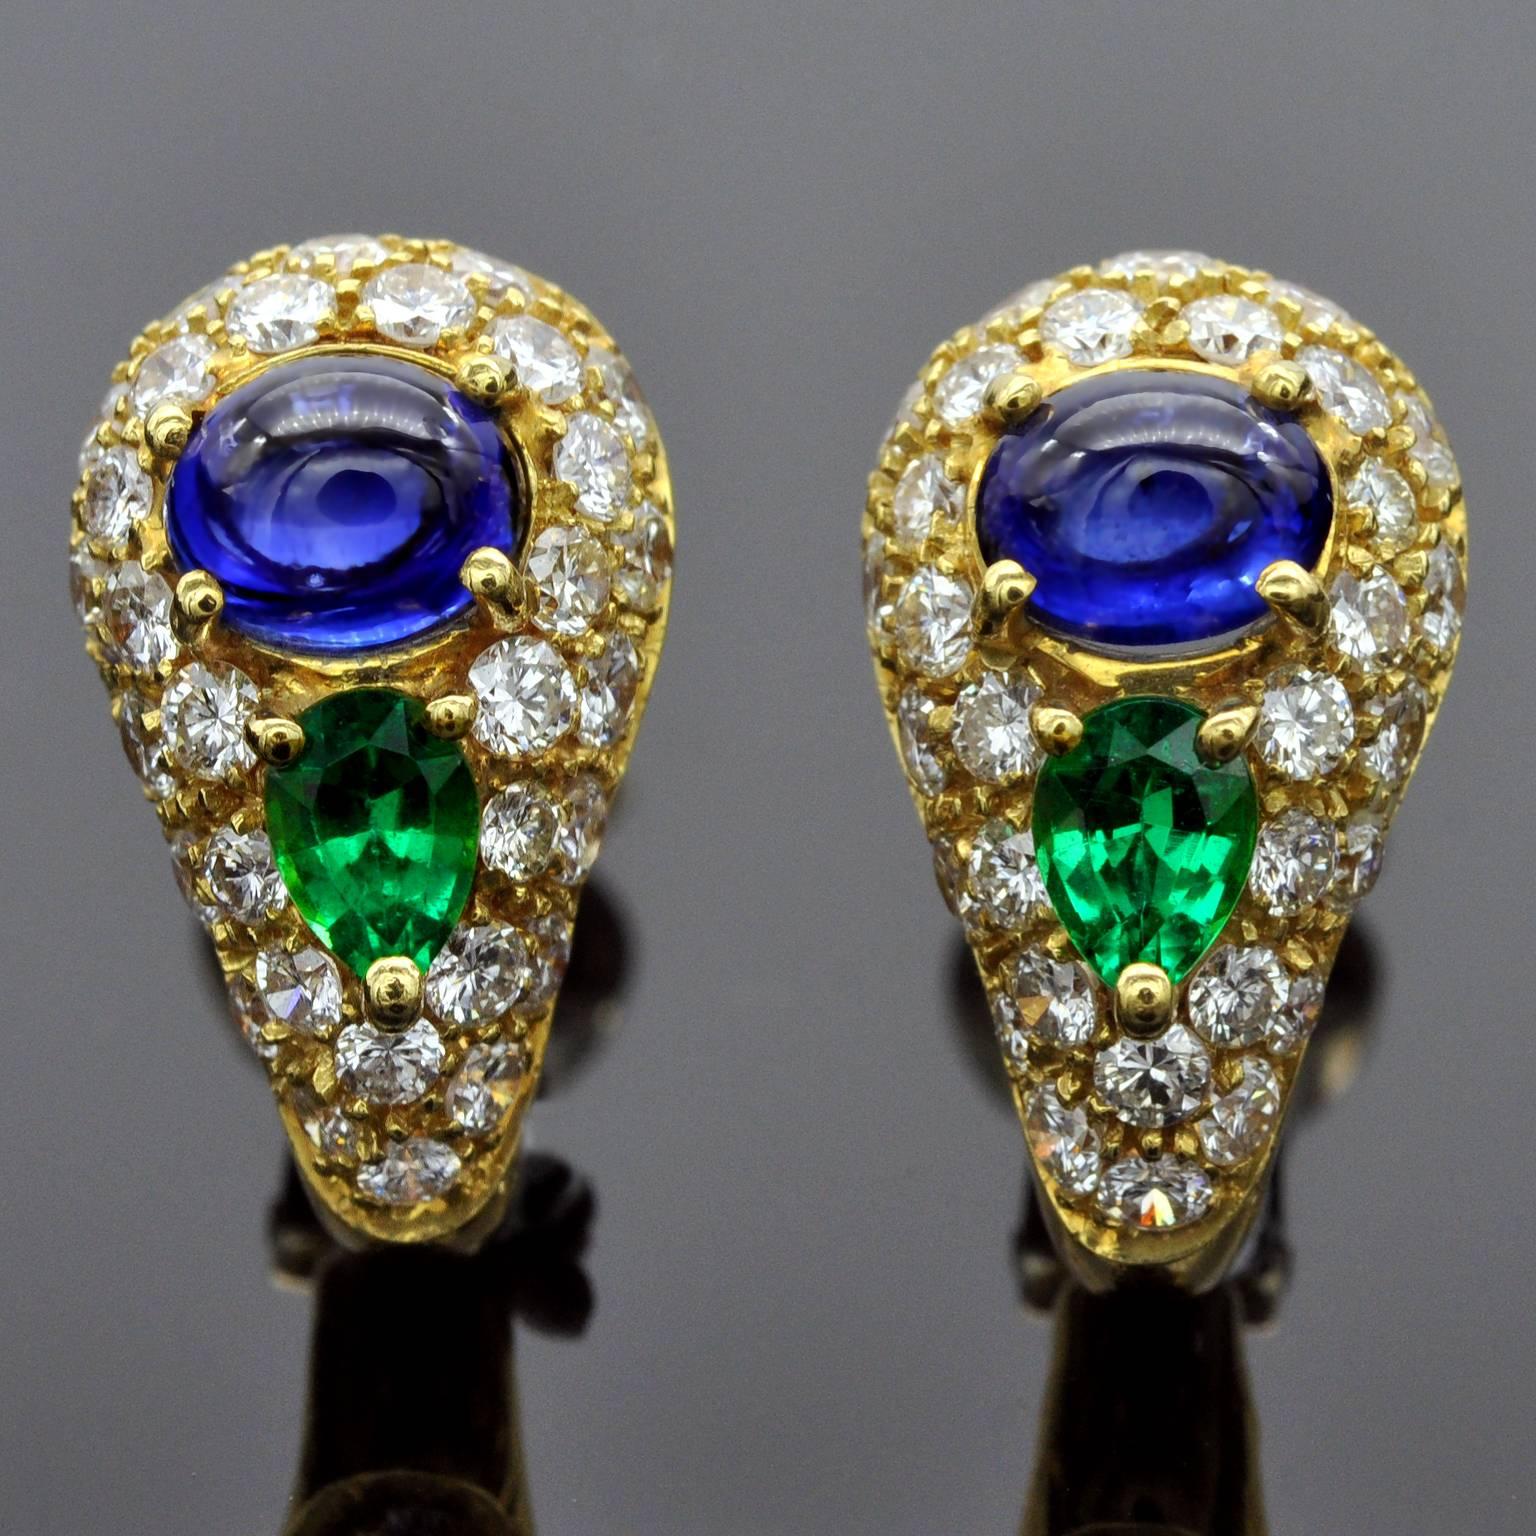 Exquisite Clip-on earrings and ring set with vibrant lustrous stones.  
Details
Sapphire cabochon: 2.51 carat
Pear Shaped emeralds: 1.12 carat
Brilliant cut diamonds  (F-G, VVS-VS): 2.67 carat 
Earrings: 17mm x 9.9mm
Ring: 10mm wide